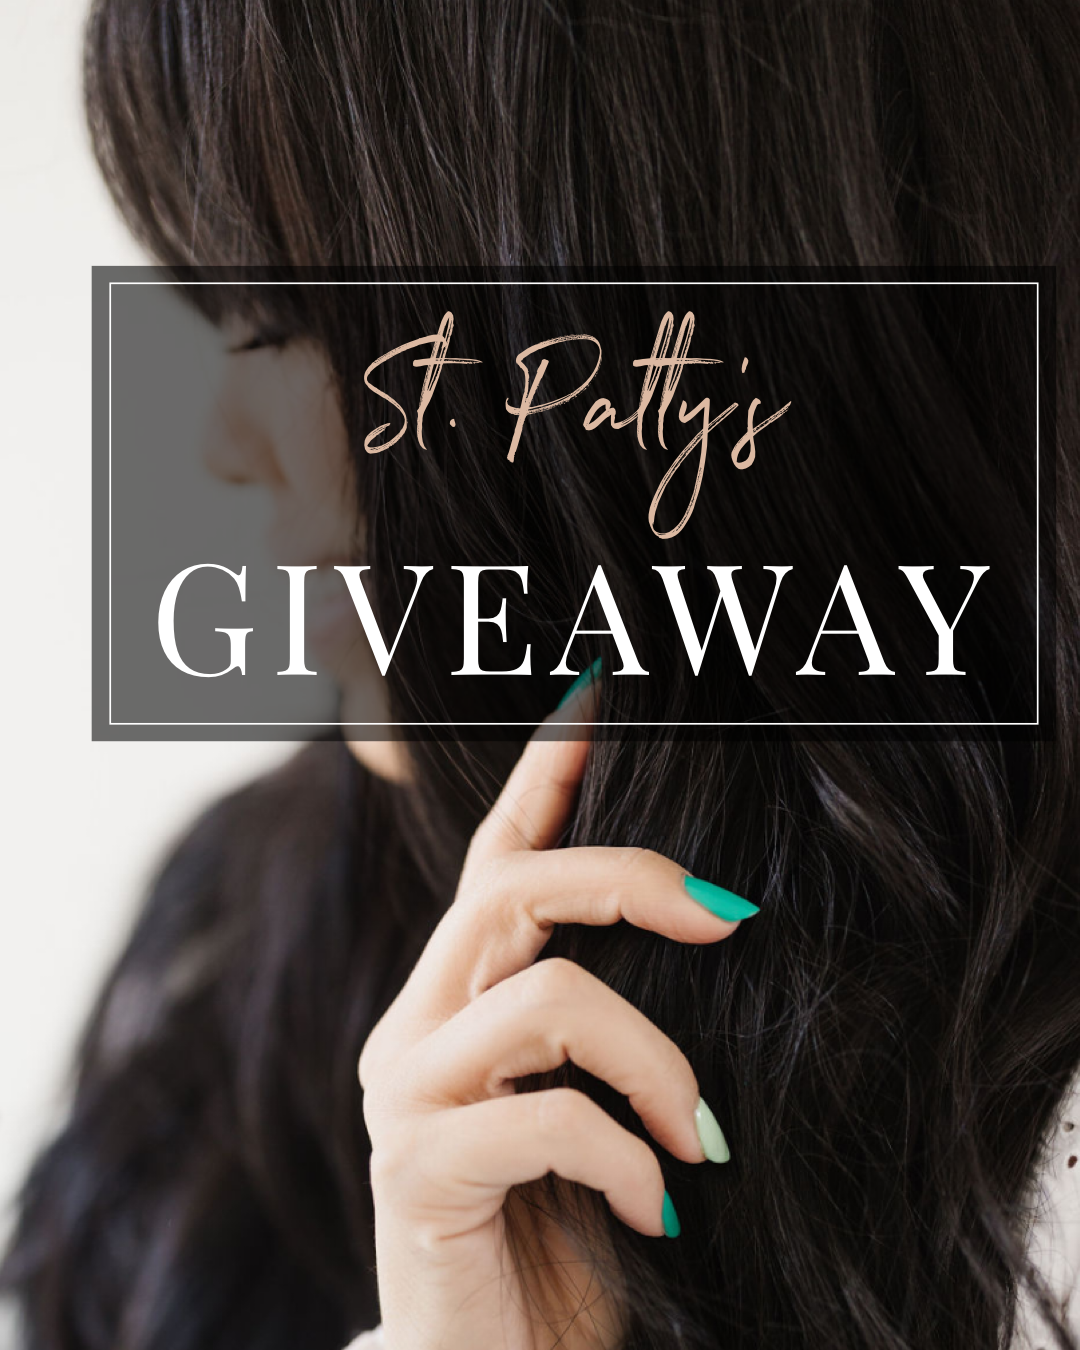 St. Patrick's Day Giveaway!